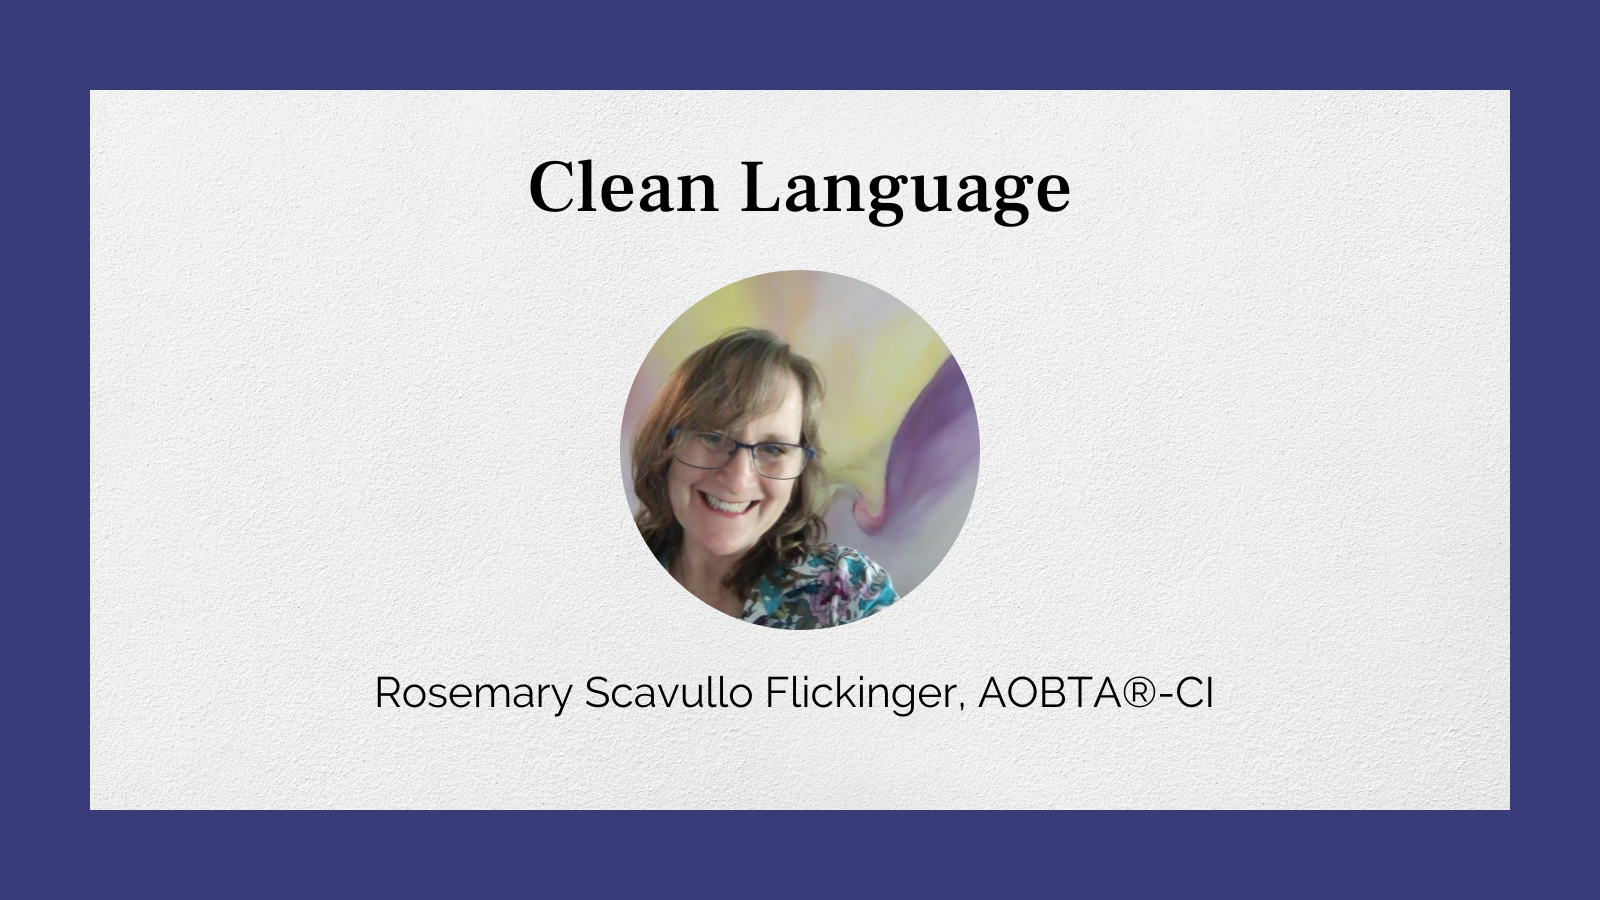 Clean Language by Rosemary Scavullo Flickinger